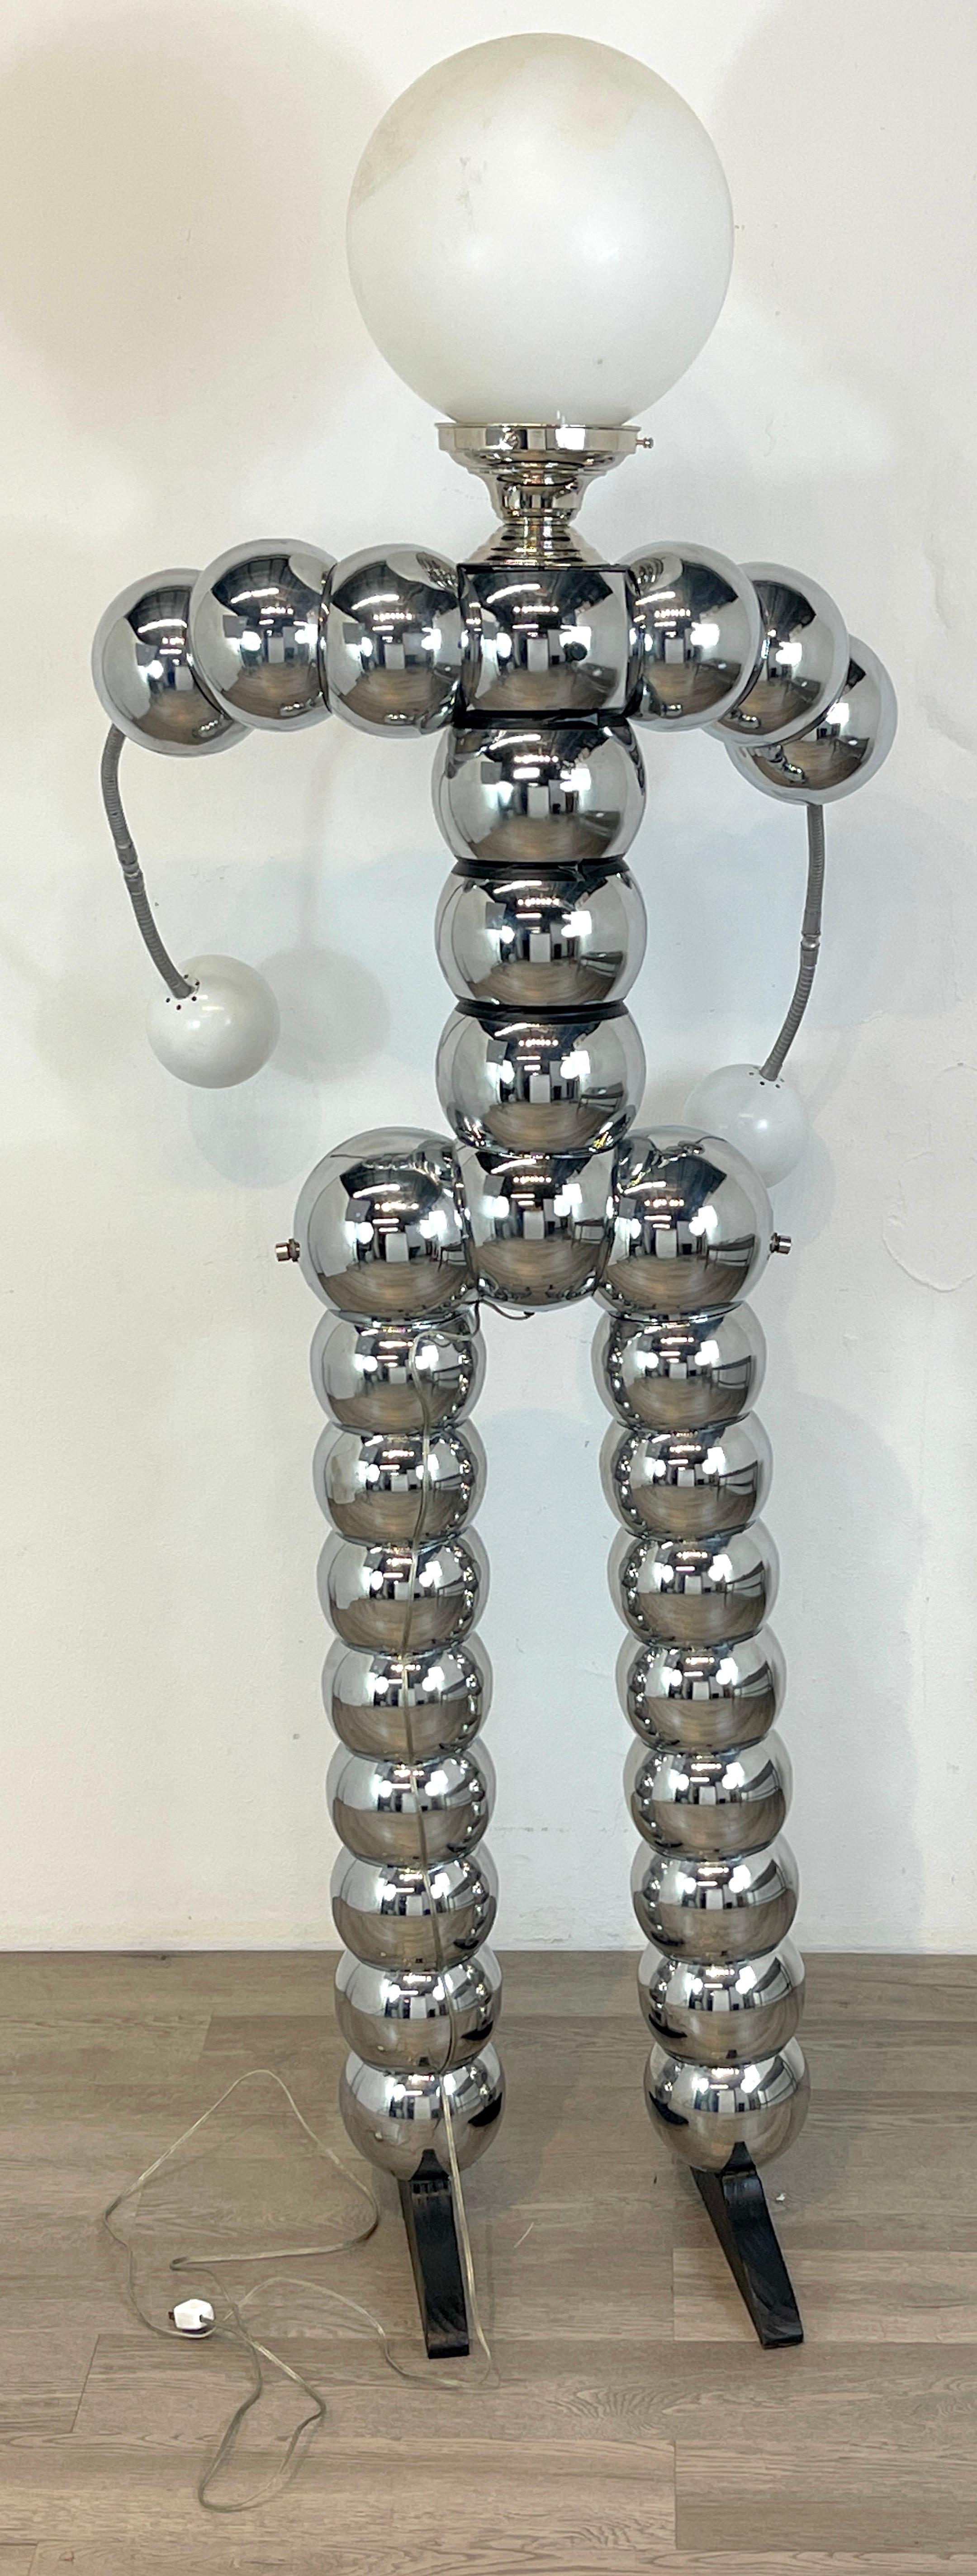 20th Century Chrome Stacked Ball Articulated Robot Floor Lamp Attributed to George Kovacs